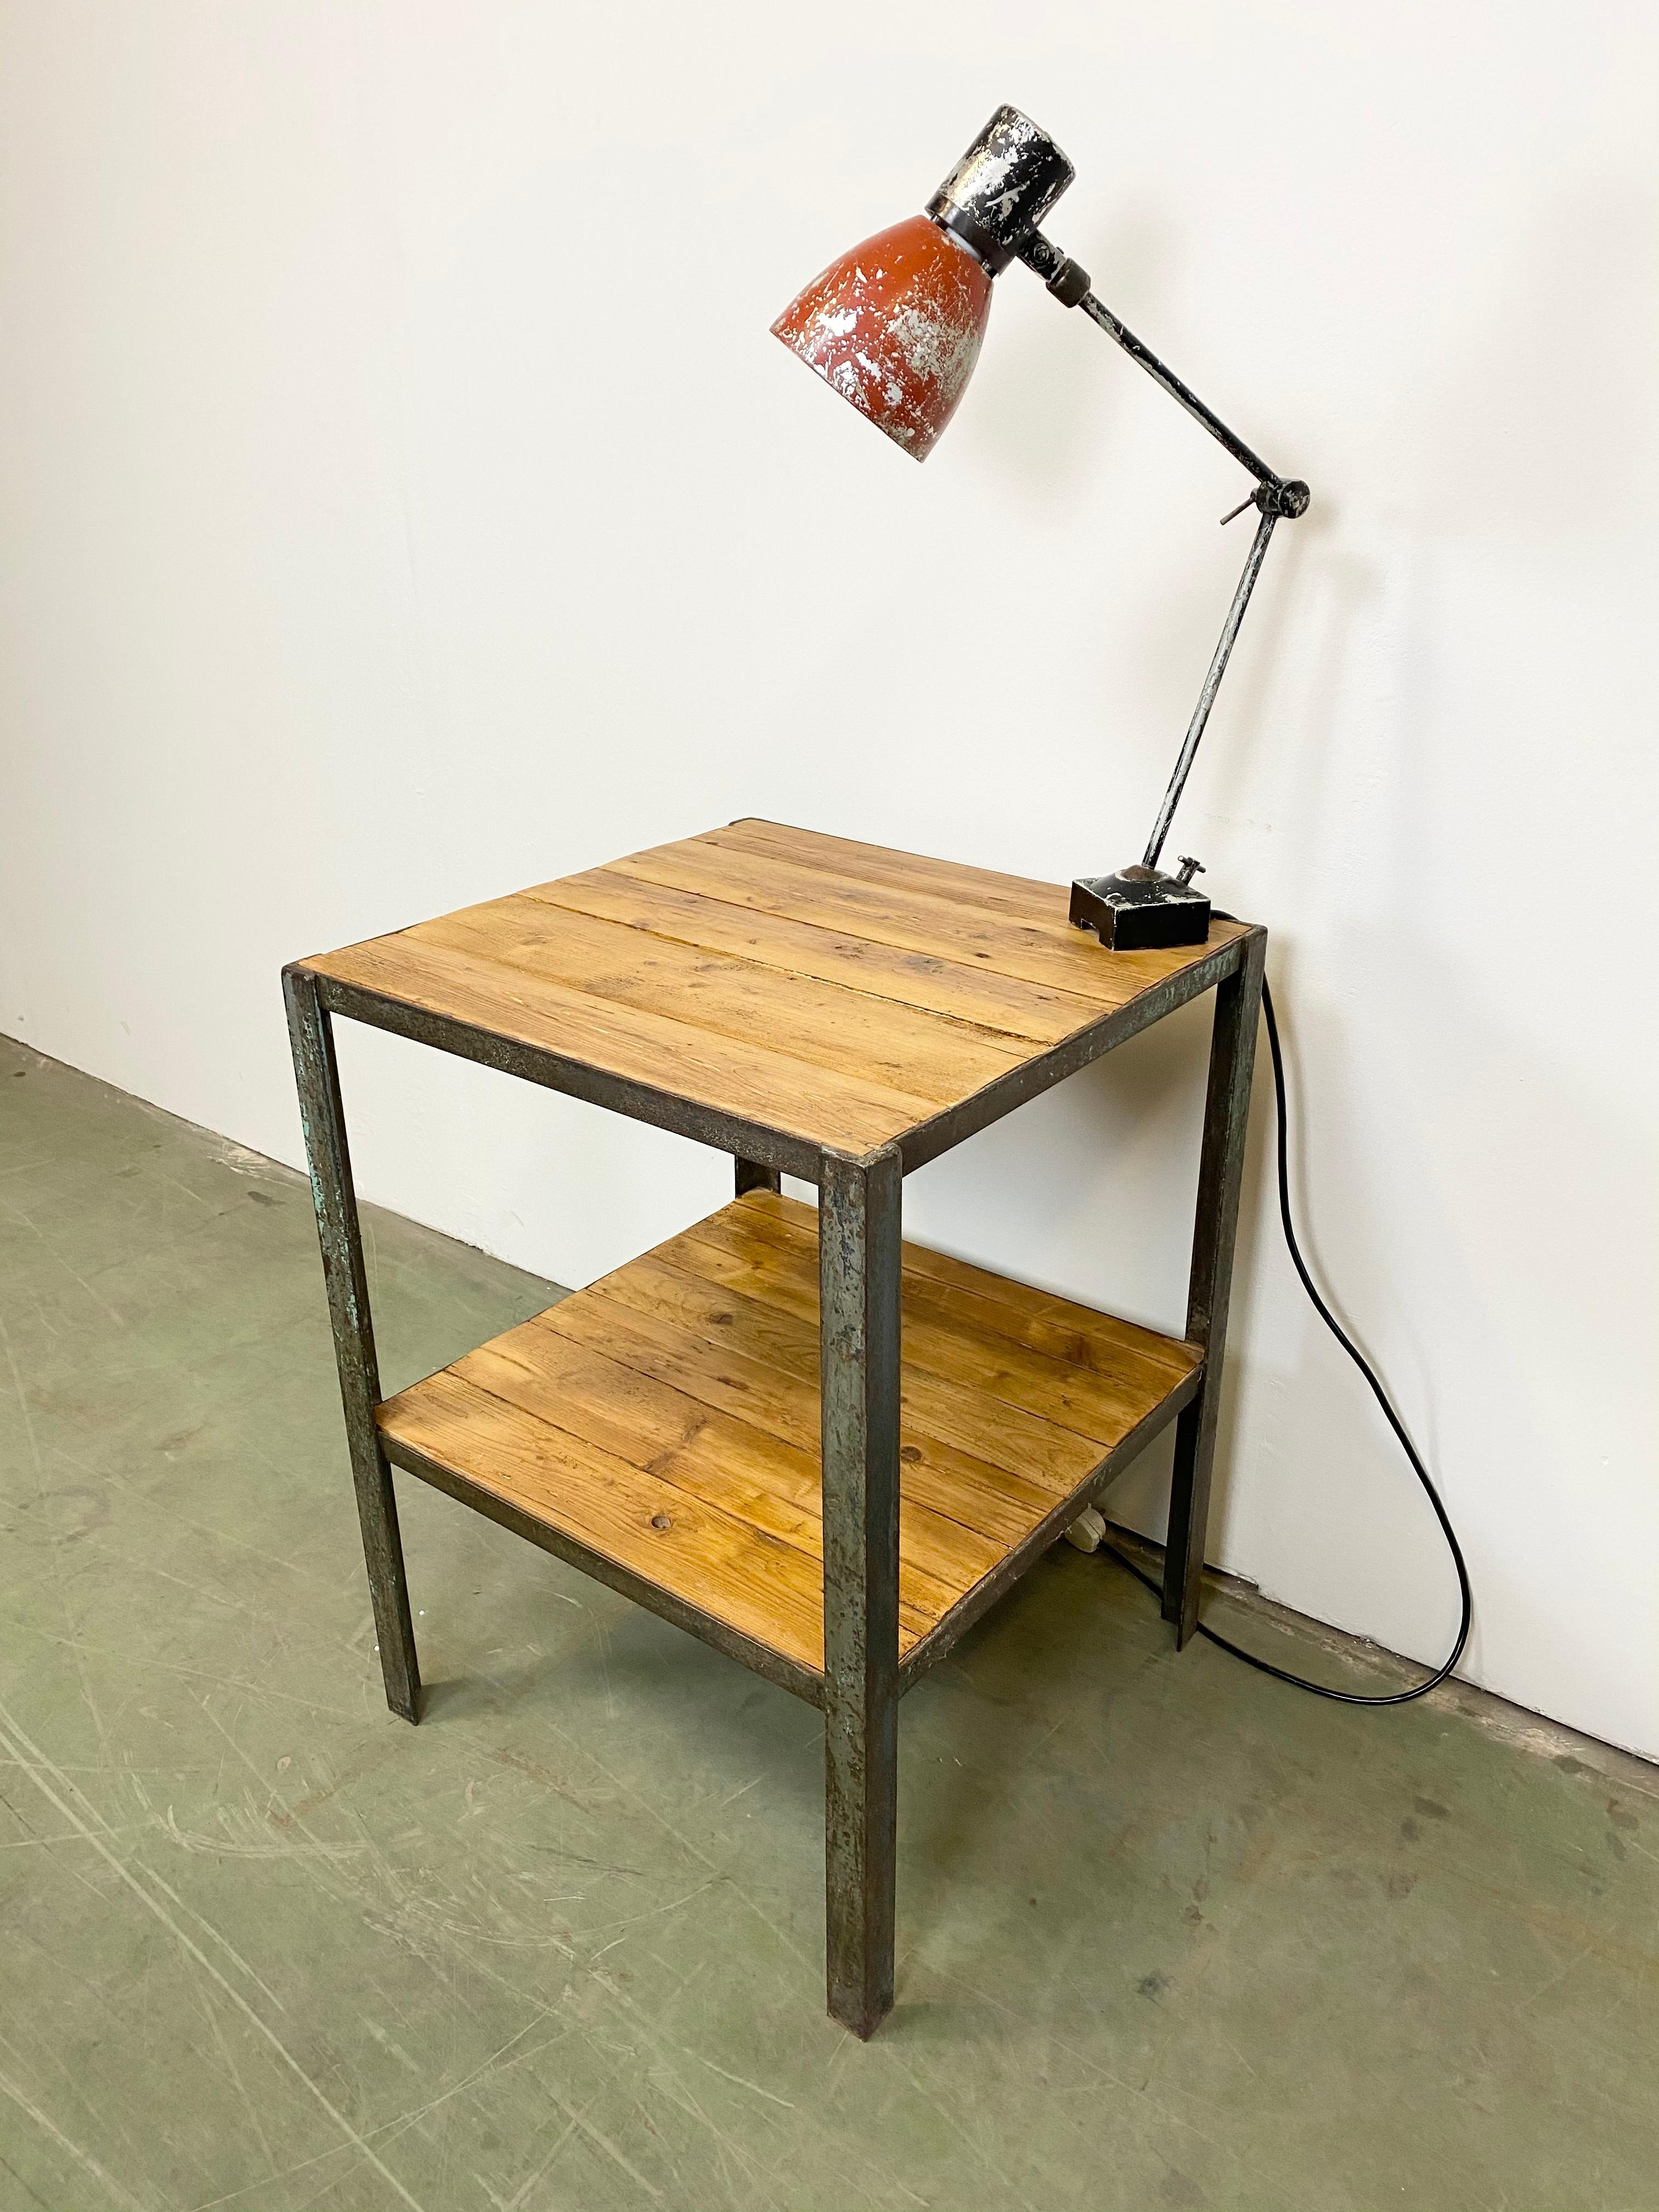 The table features iron construction and two solid wooden plates. The lamp consists iron base and arm with two adjustable joints and aluminium shade.
The porcelain socket requires E 27 lightbulbs.
Additional dimensions :
The dimensions of the